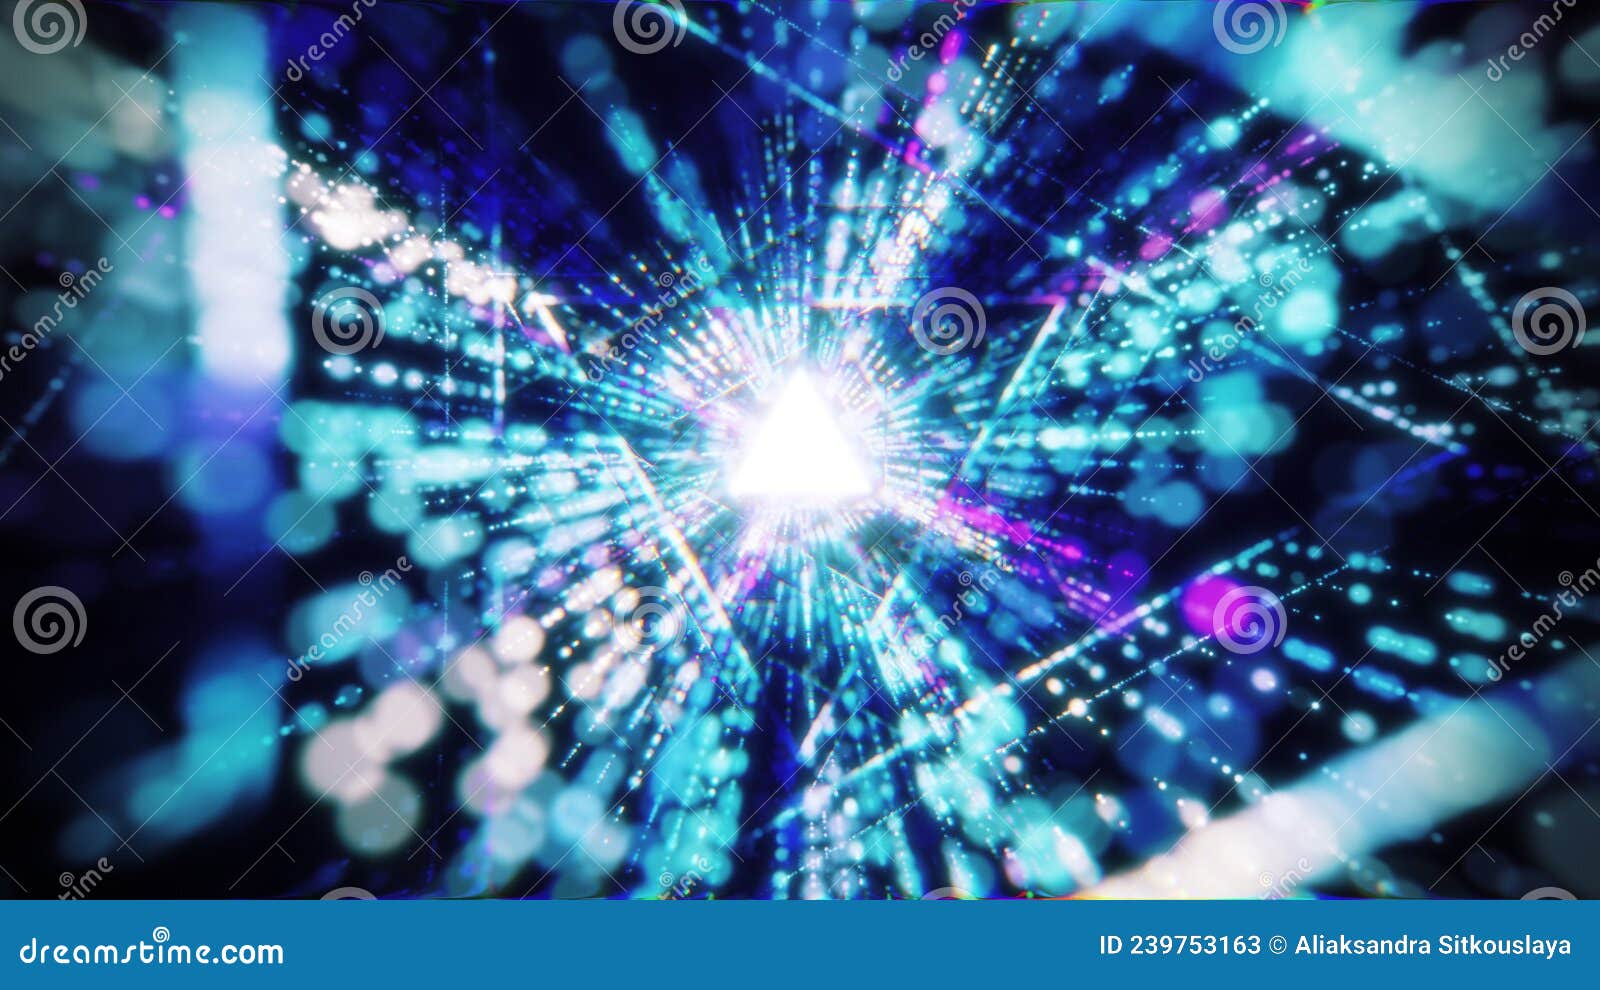 Audio Visual Triangle Glowing VJ Tunnel Video for Edm Music Animation.  Abstract Background with Neon Triangles Tunnel Stock Illustration -  Illustration of fashion, stage: 239753163